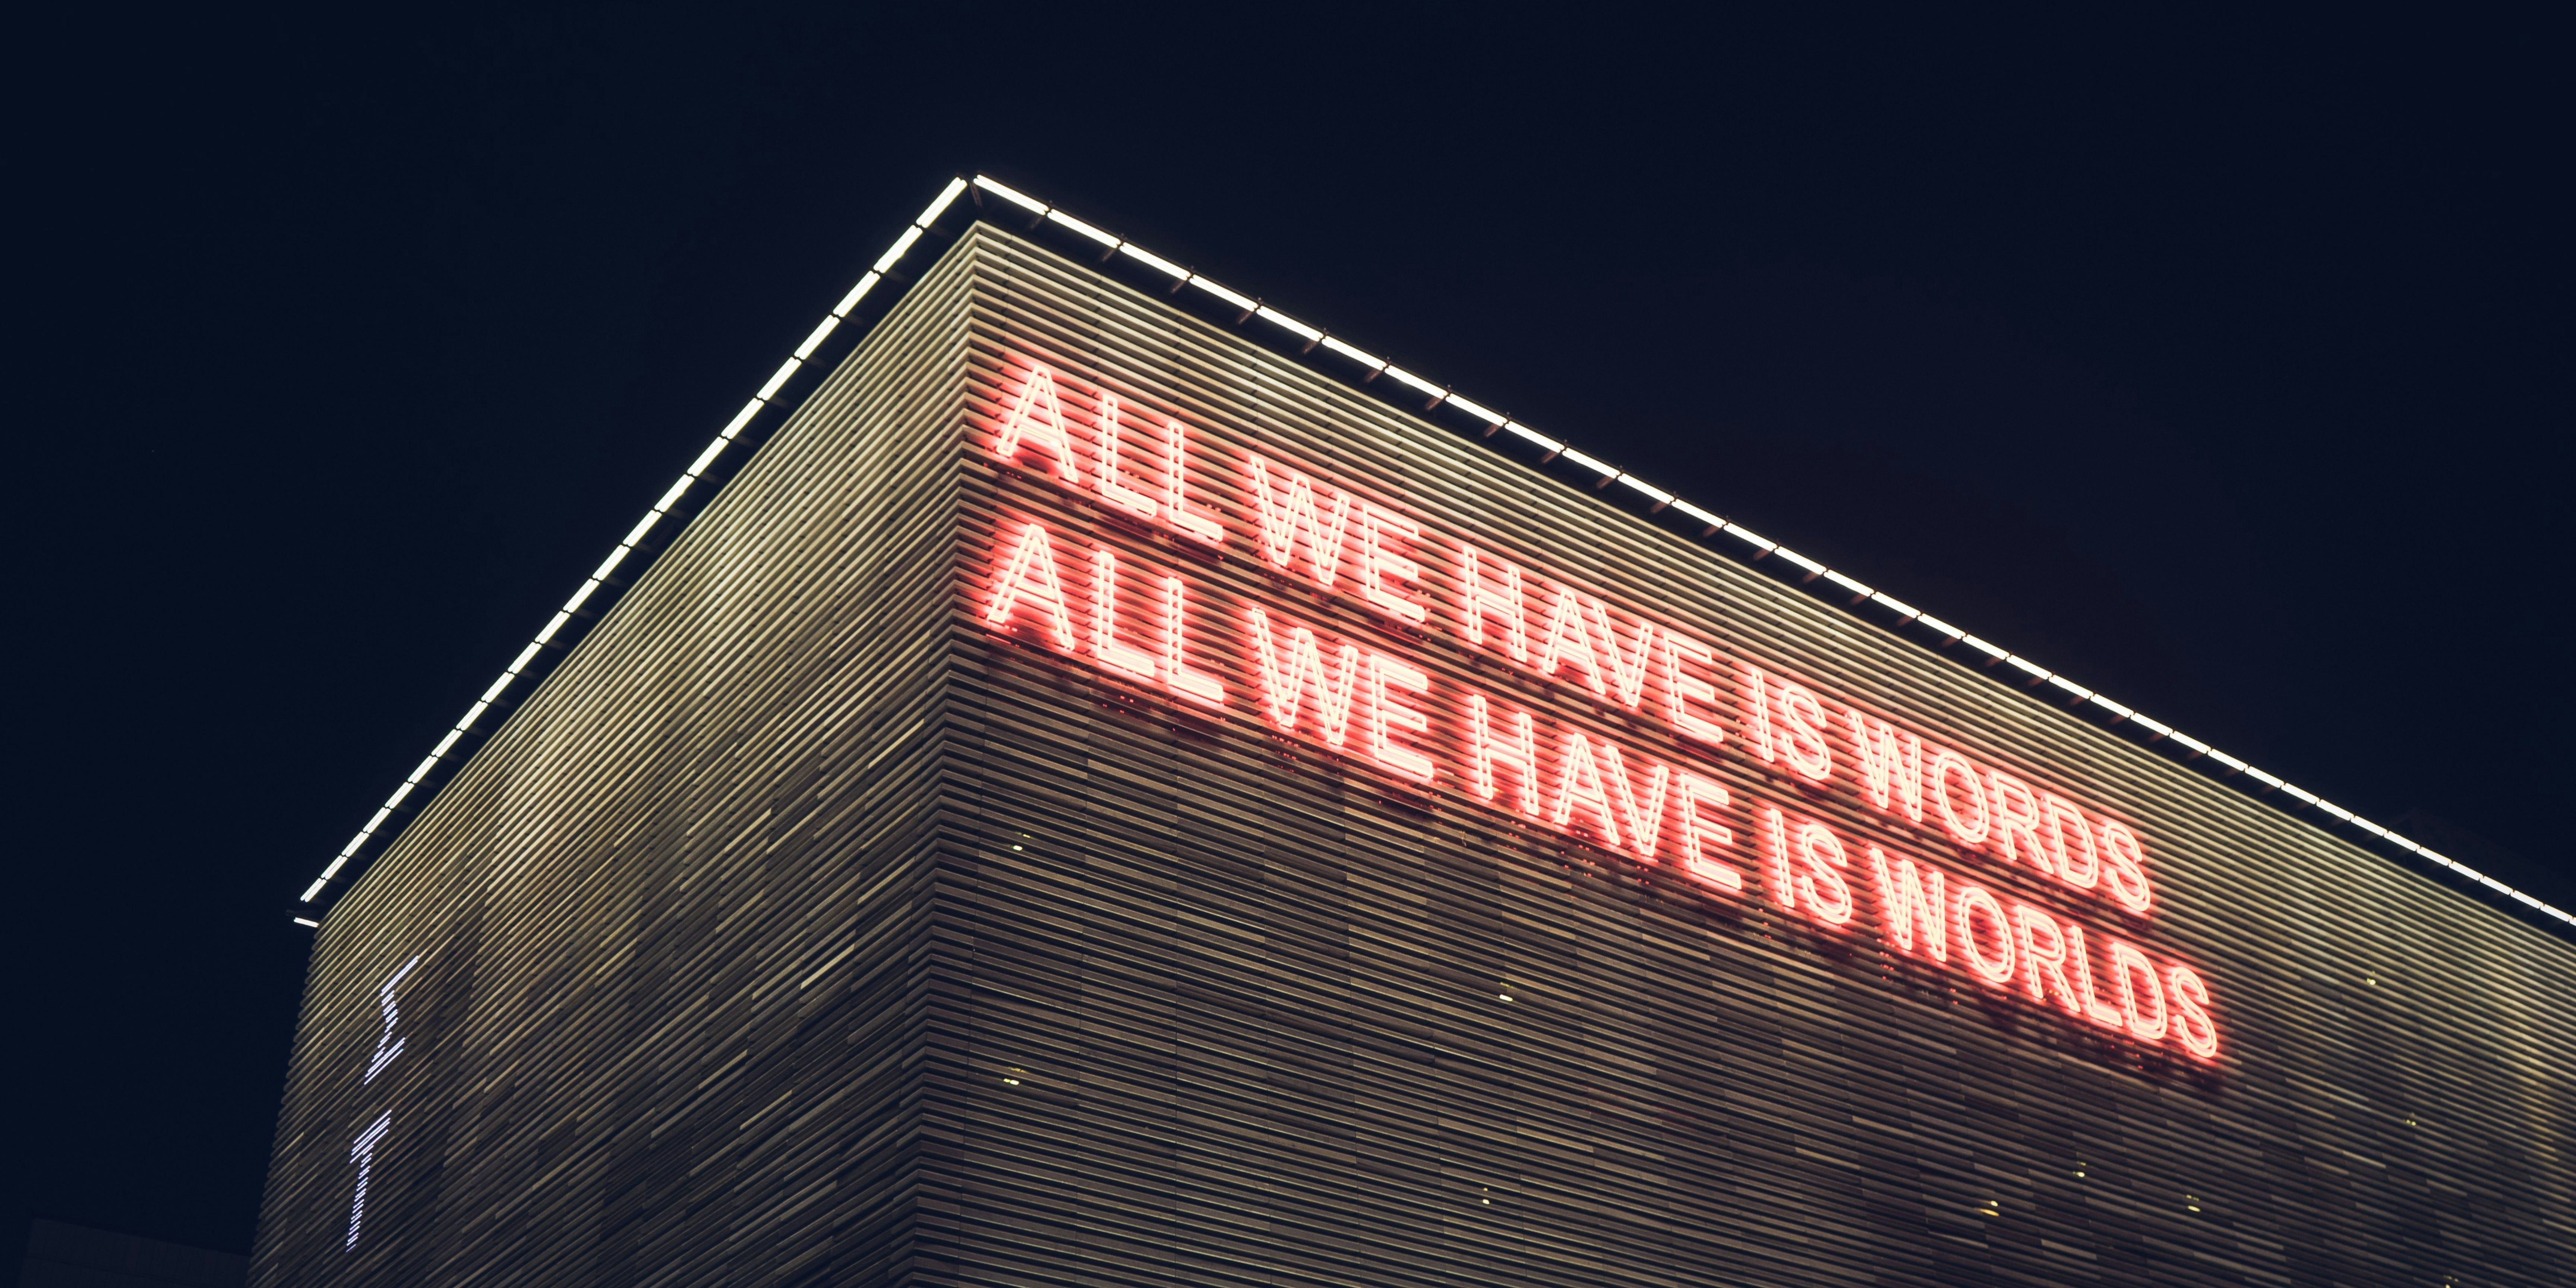 The illuminated facade of the Onassis Stegi building at night with the phrase "ALL WE HAVE IS WORDS" displayed.